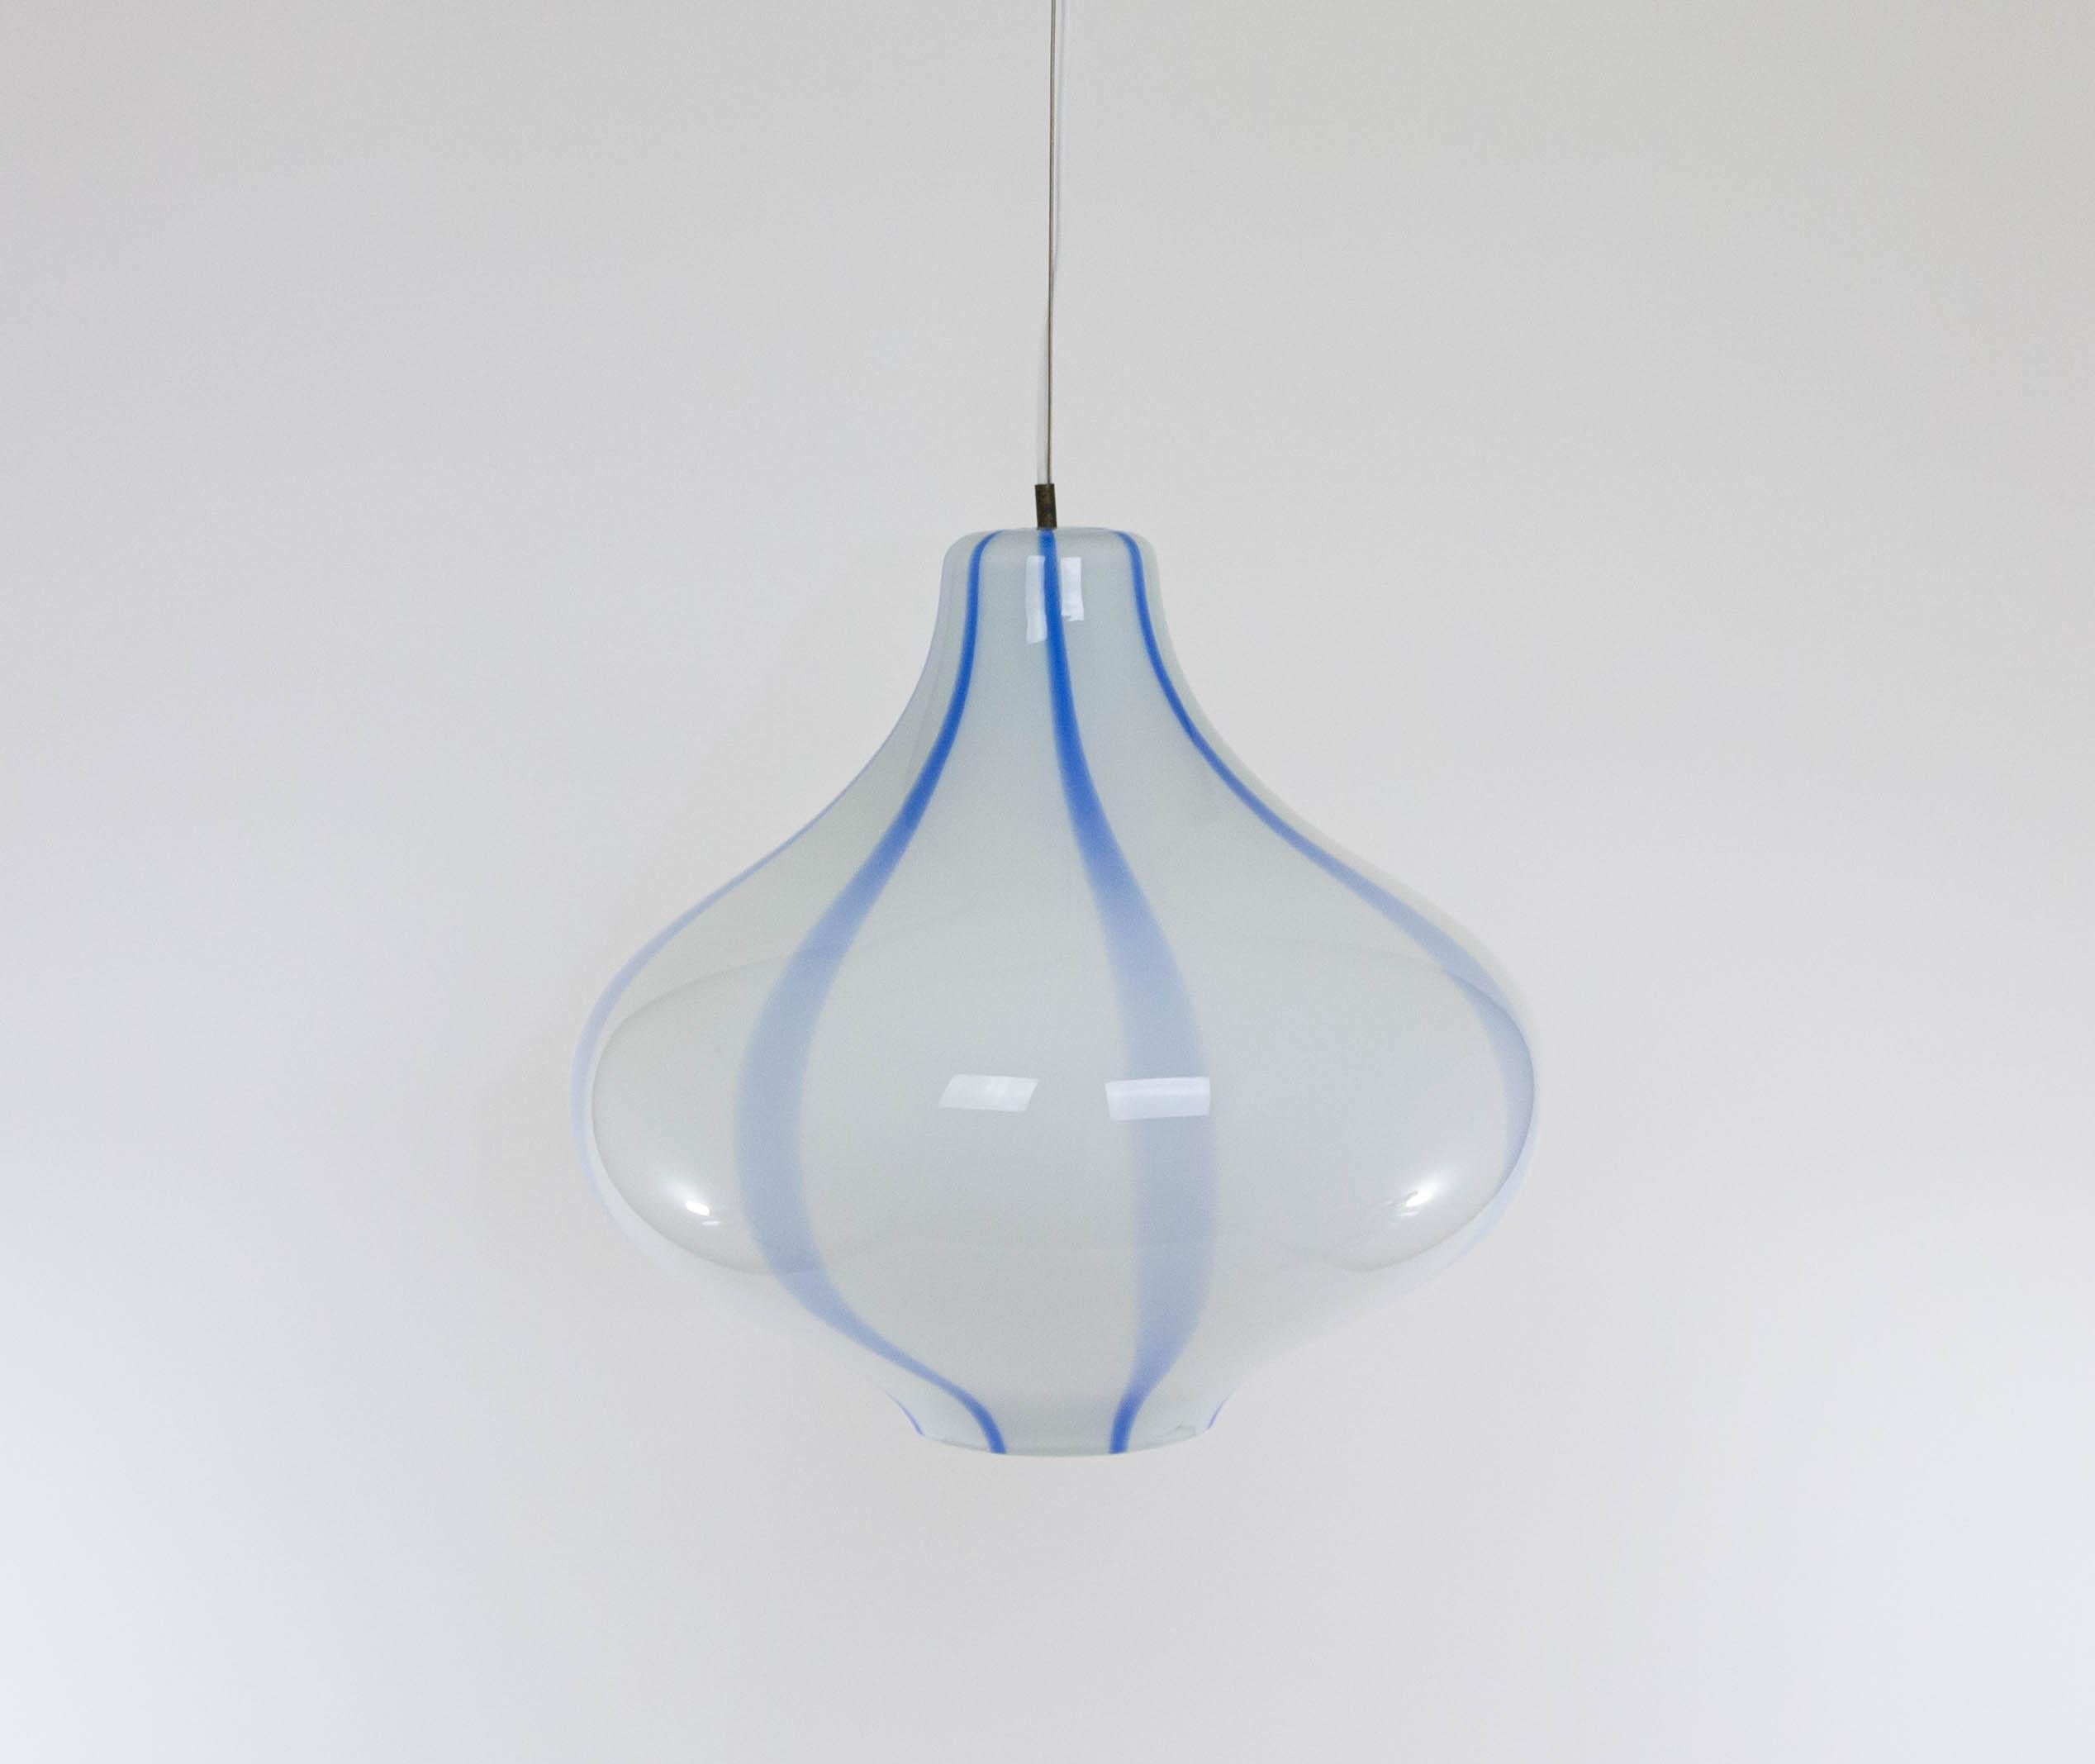 Very large Cipolla pendant, white with subtle blue stripes, designed by Massimo Vignelli at the start of his impressive career in design and executed by Murano glass specialist Venini.

This model has been produced in two different sizes, this is